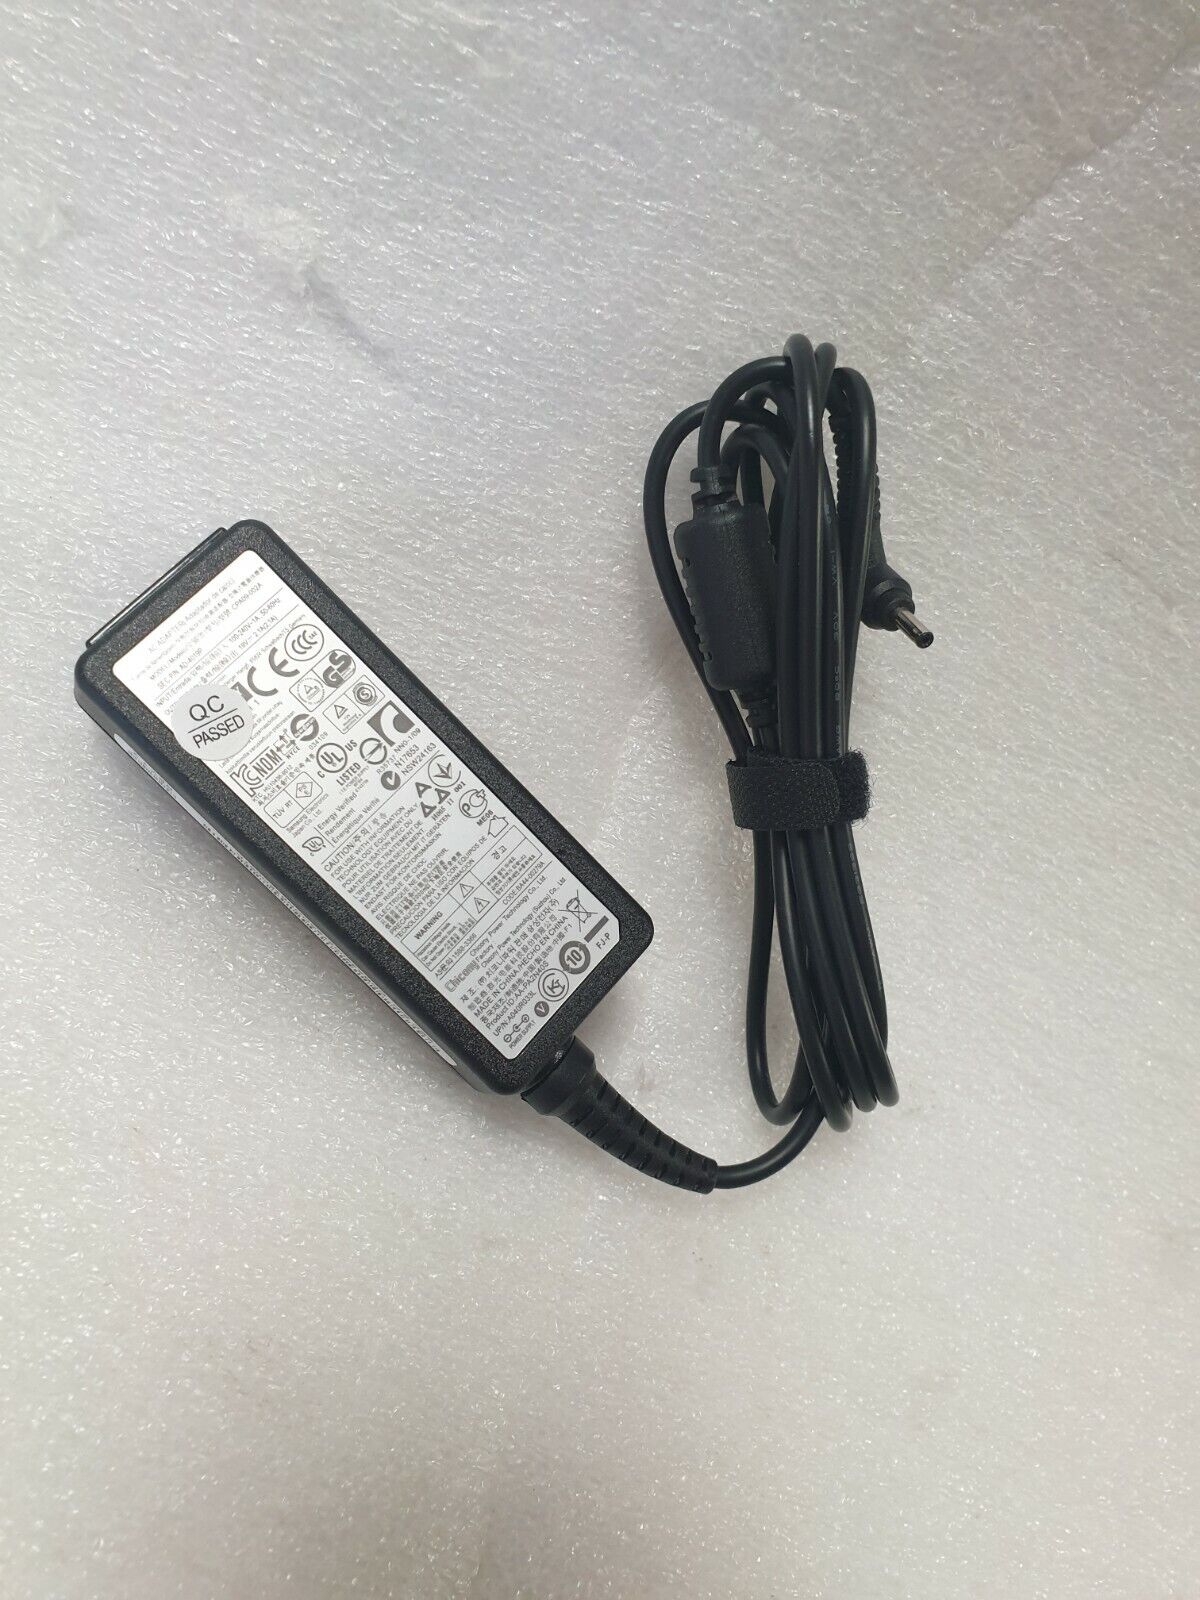 OEM Samsung Ultrabook 530U cpa09-002a 40w AC power supply adapter charger 